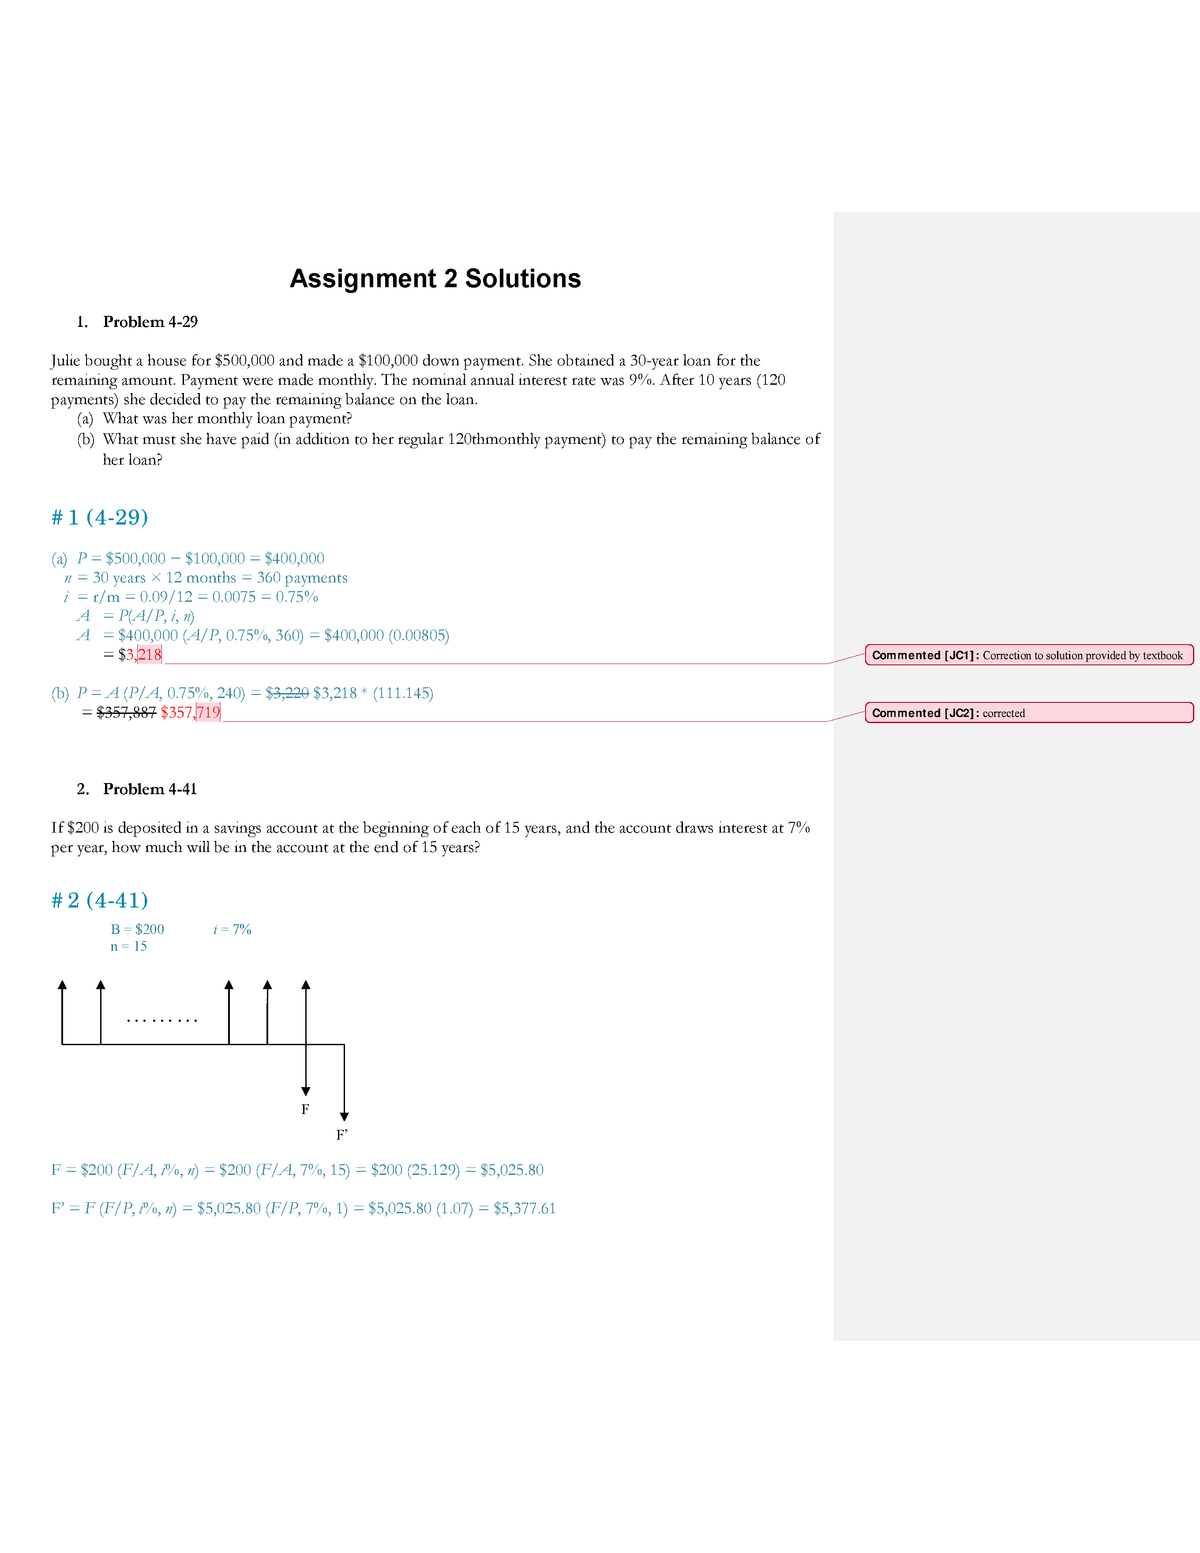 error value on right hand side of assignment is undefined